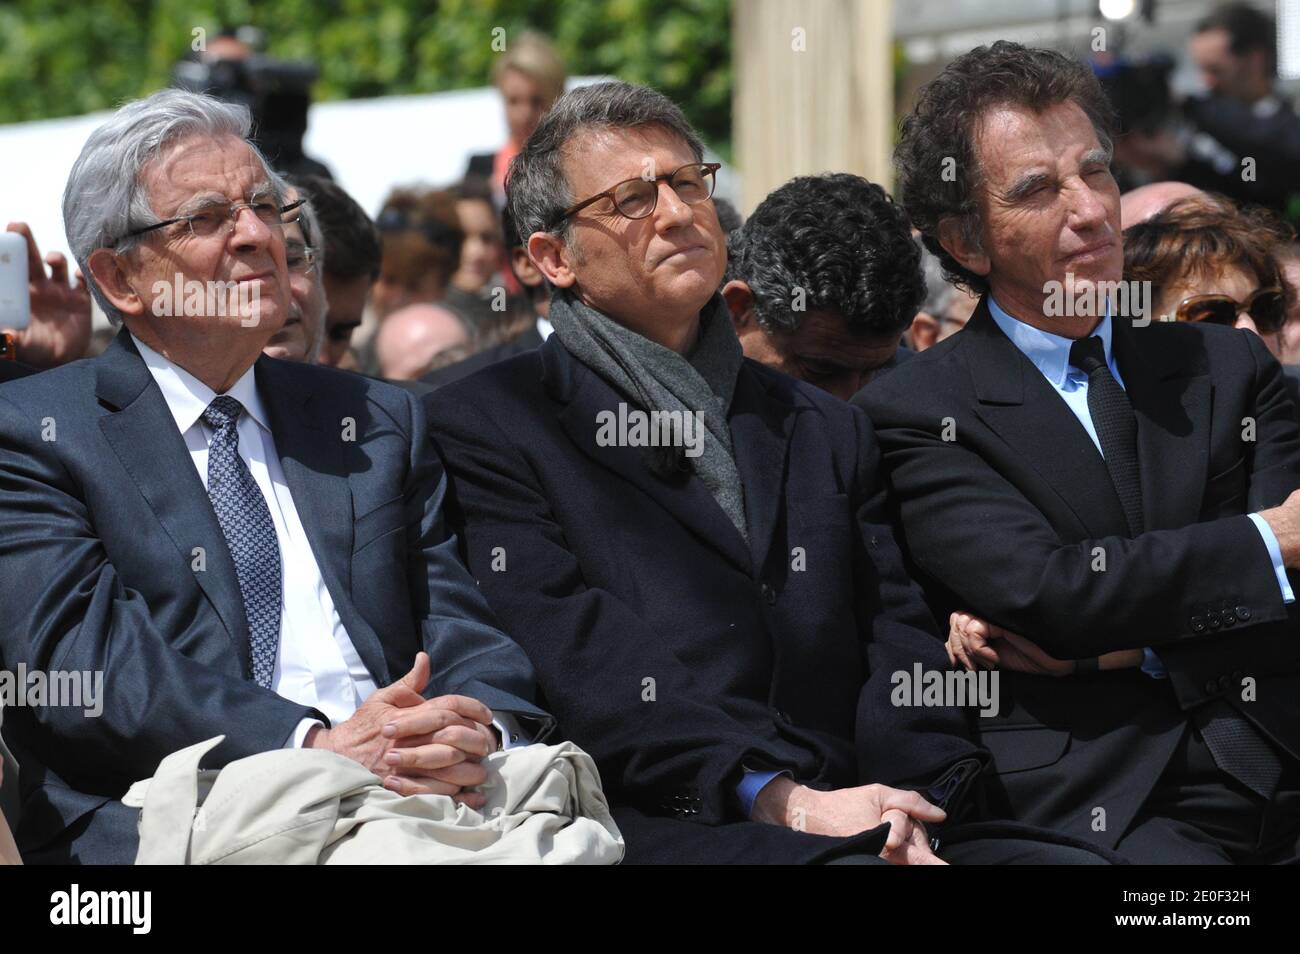 Jean-Pierre Chevenement, Vincent Peillon, Jack Lang pictured a ceremony at  statue of Jules Ferry at